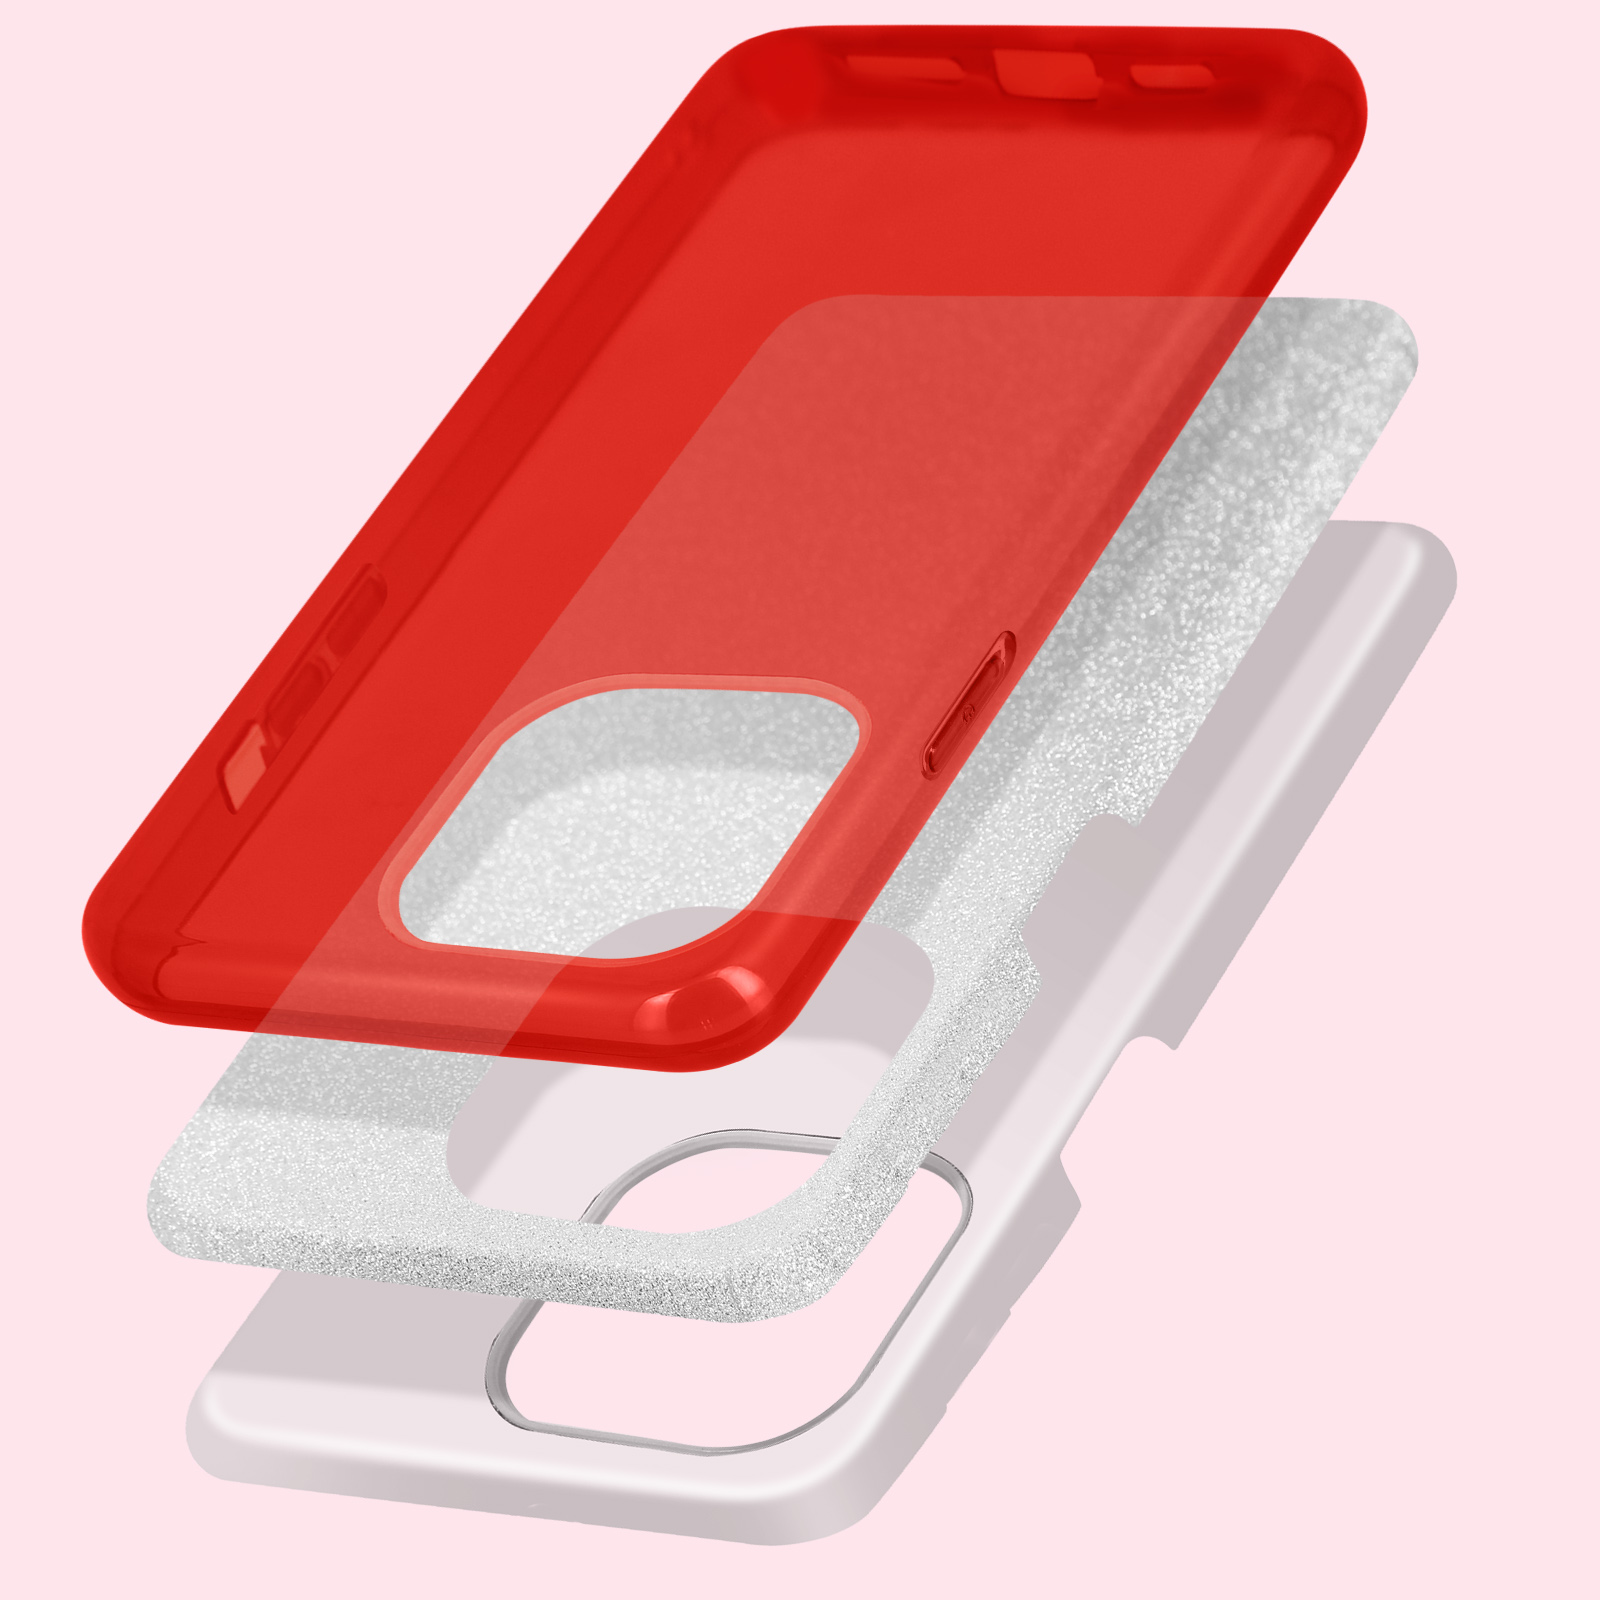 14 Papay iPhone Max, Rot Series, AVIZAR Backcover, Apple, Pro